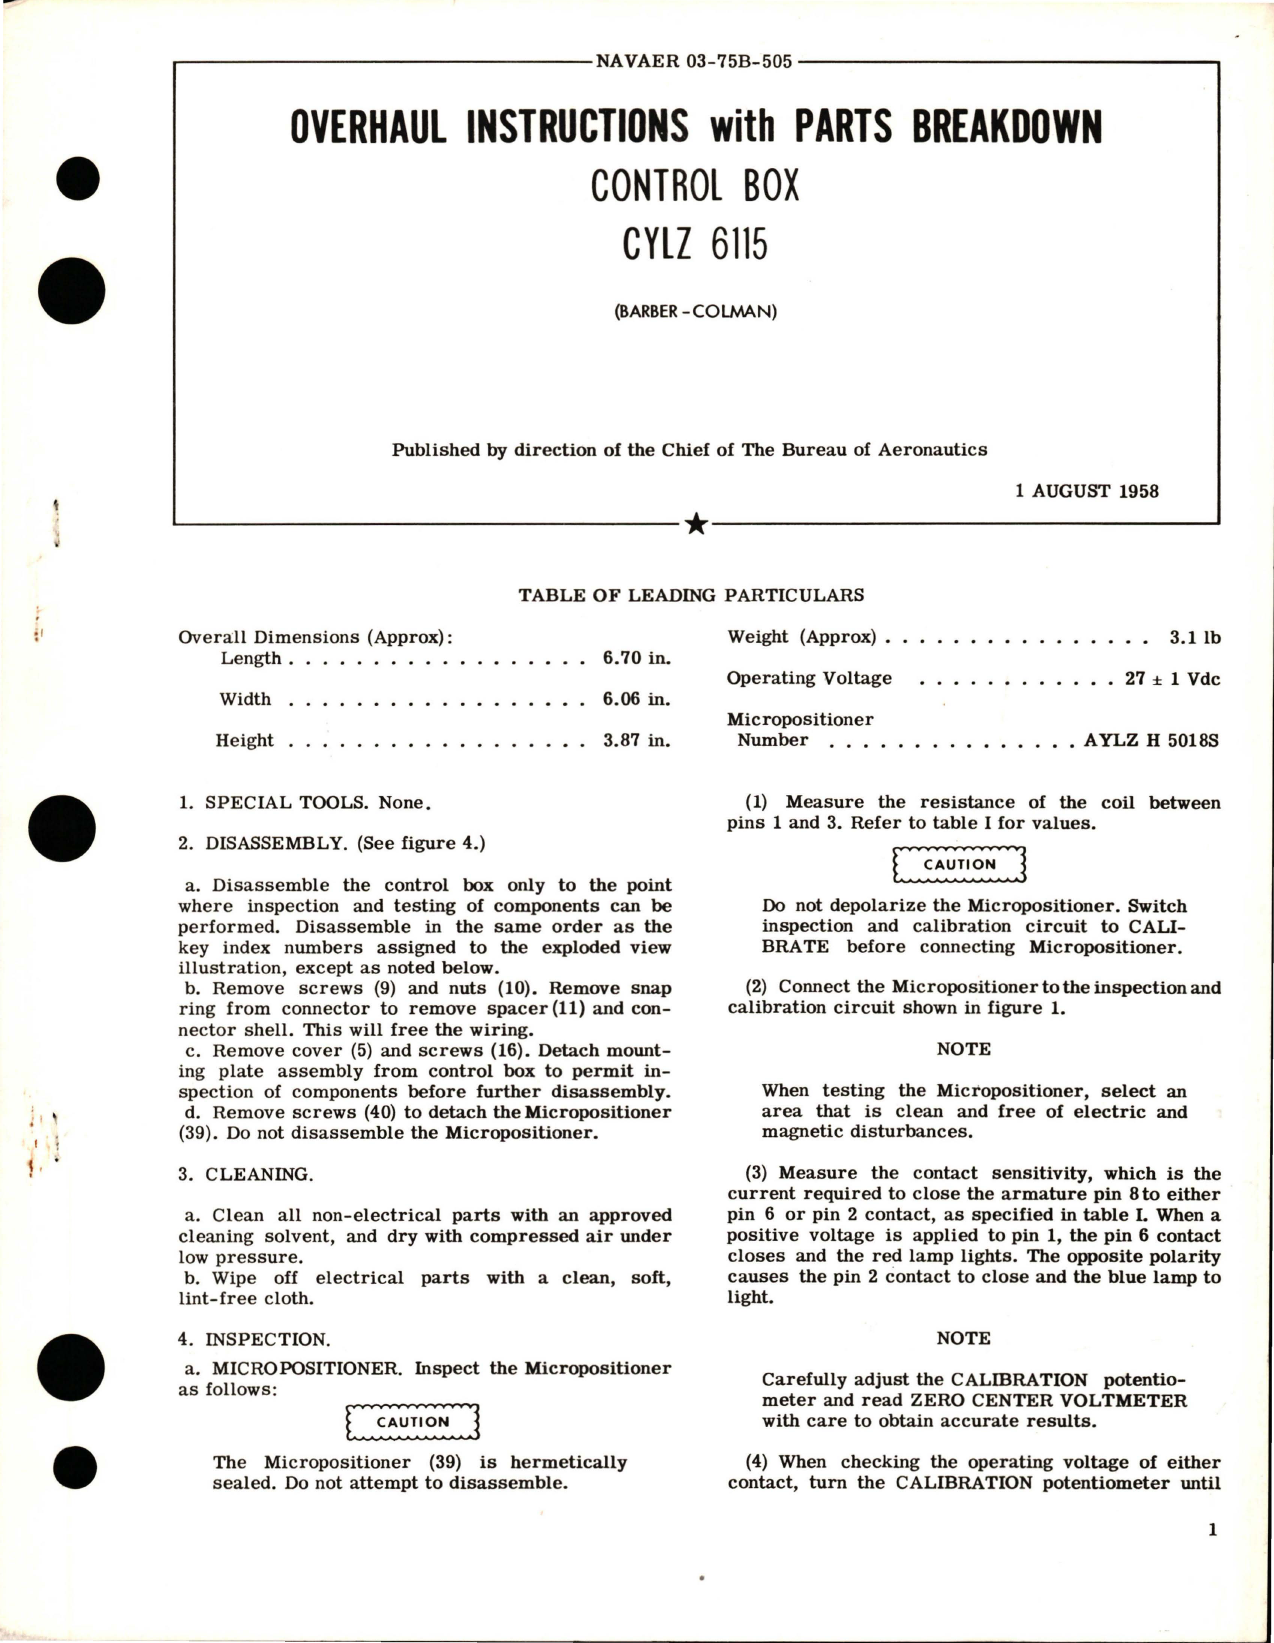 Sample page 1 from AirCorps Library document: Overhaul Instructions with Parts Breakdown for Control Box - CYLZ 6115